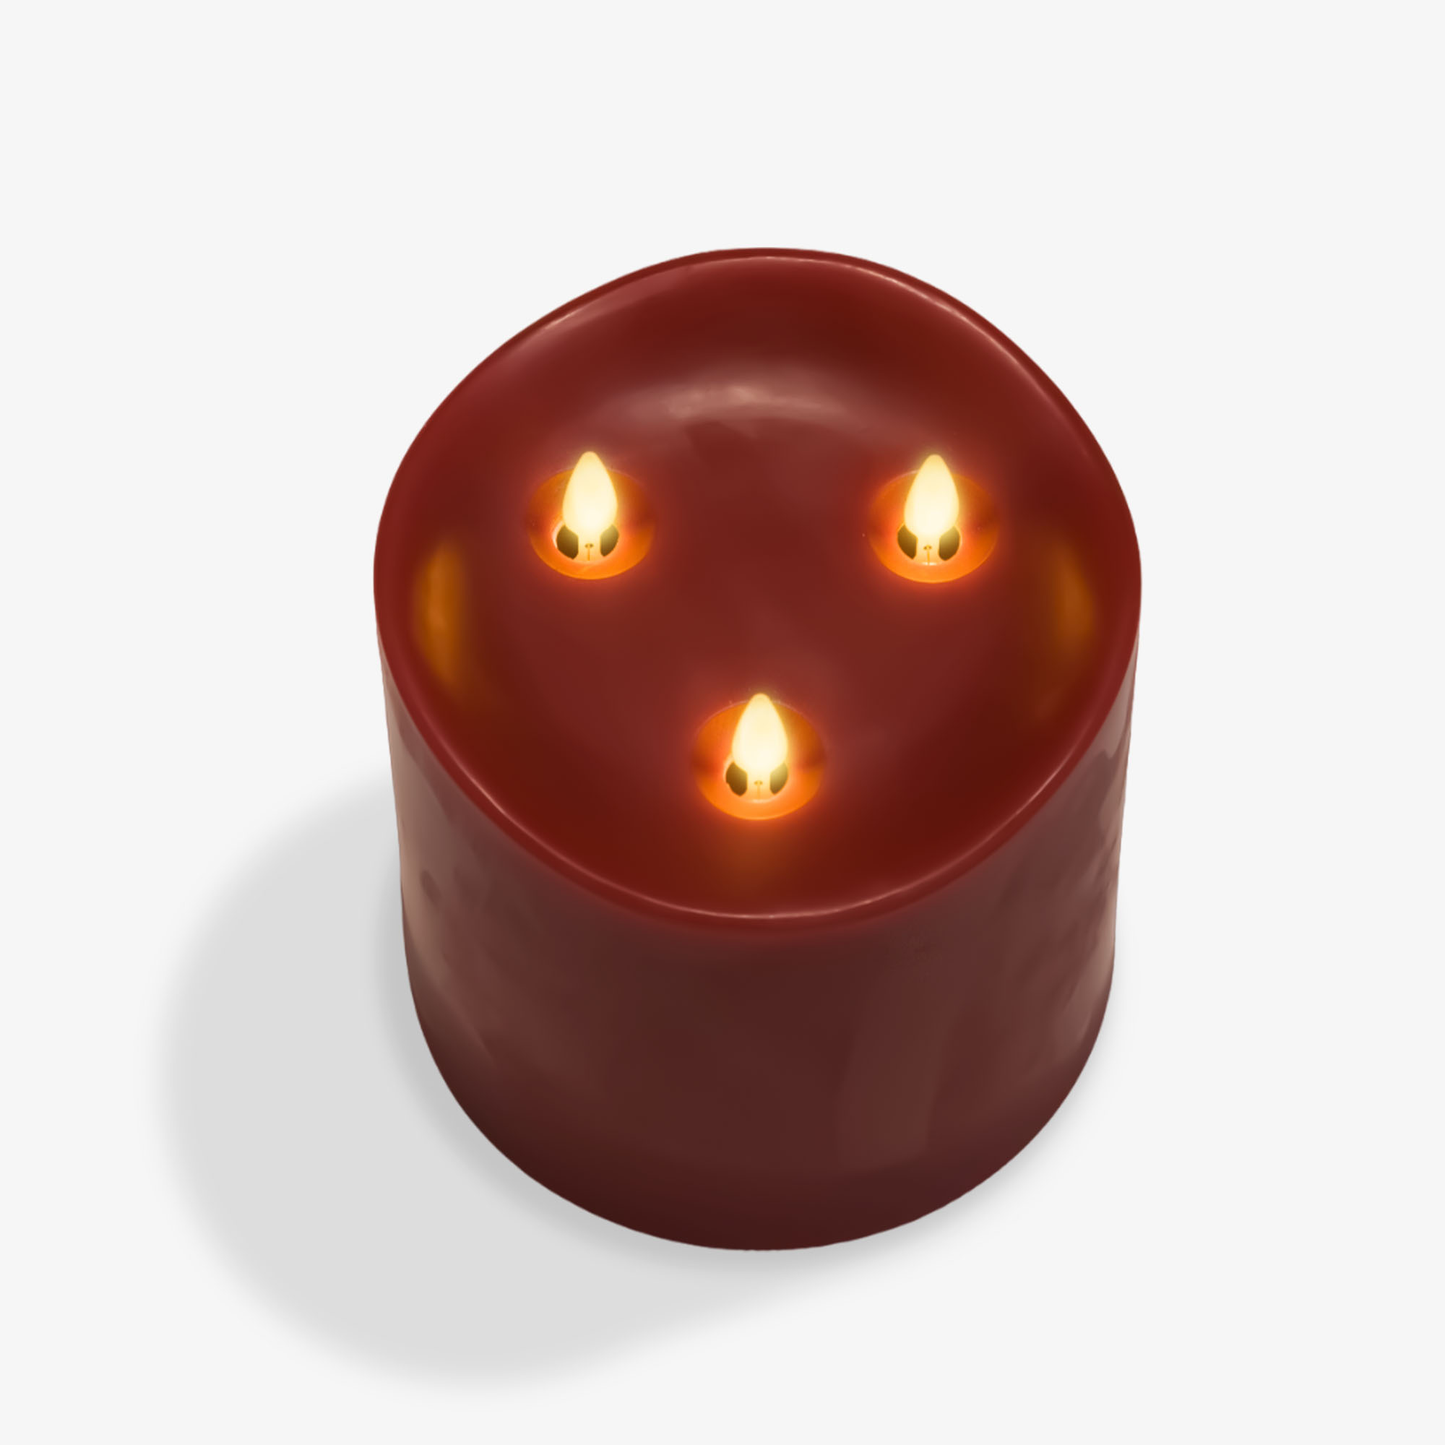 Burgundy Flameless Candle Tri-Flame Grand Pillar - Melted Top